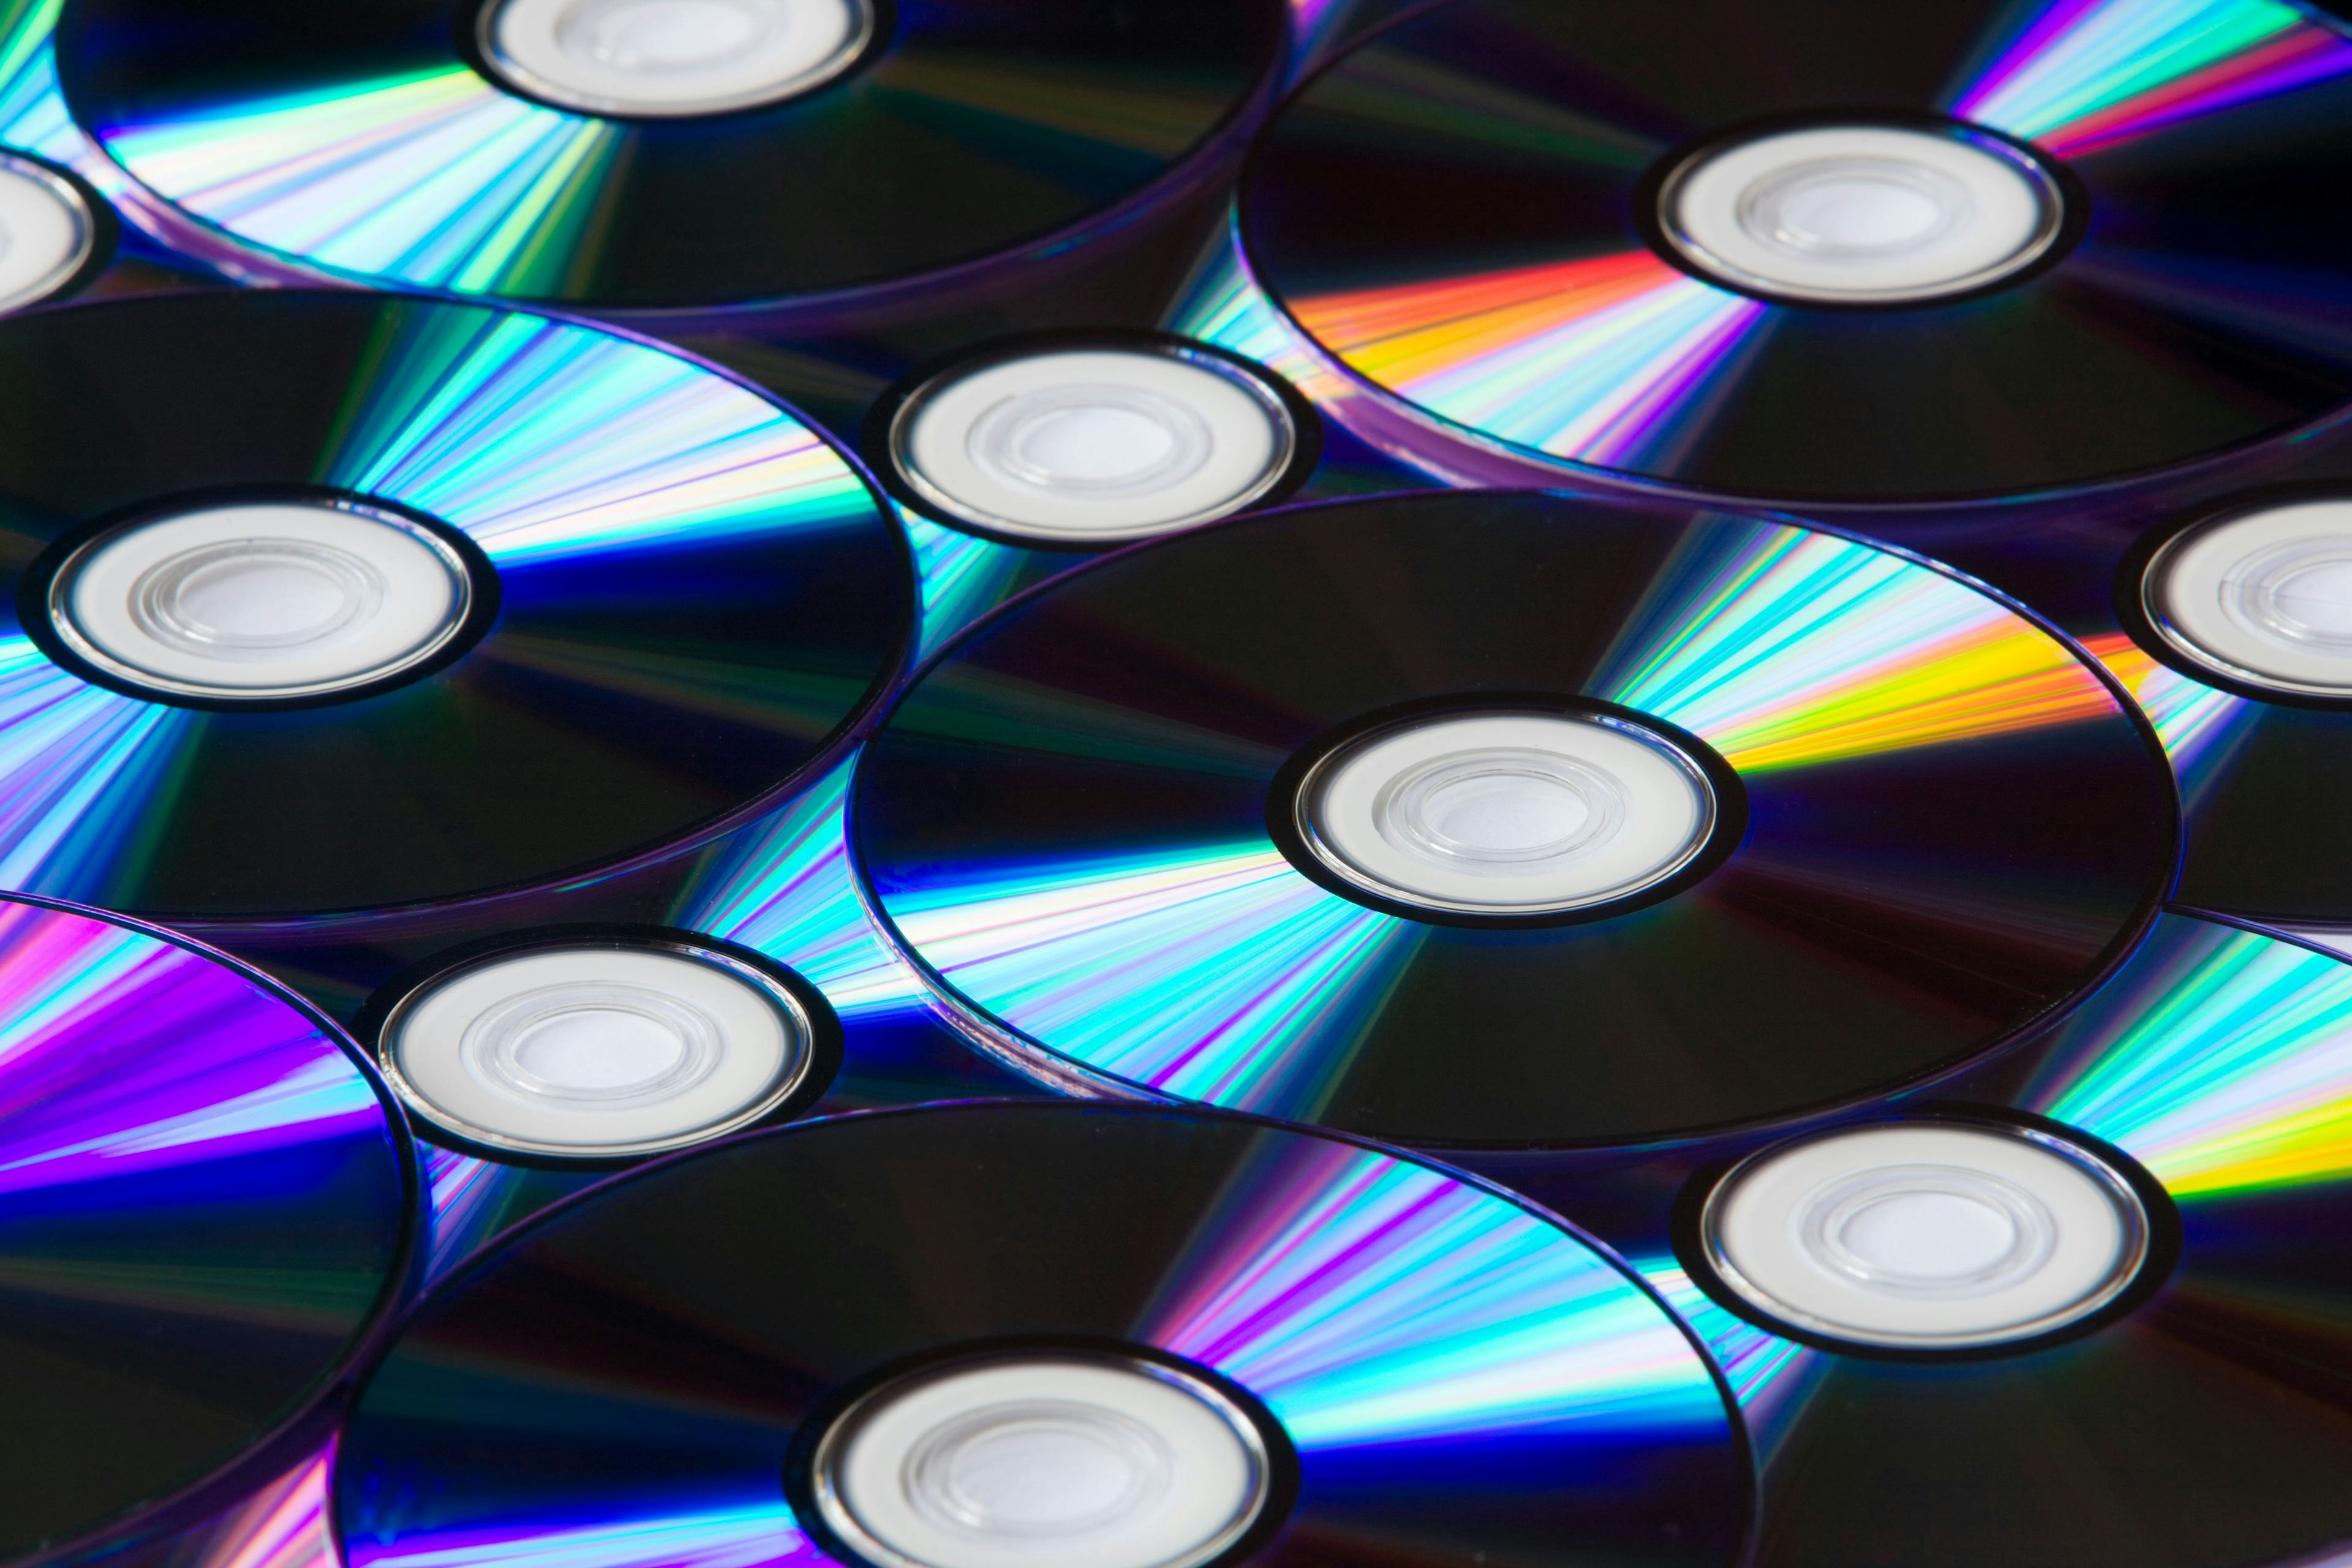 Optical discs with rainbow colors